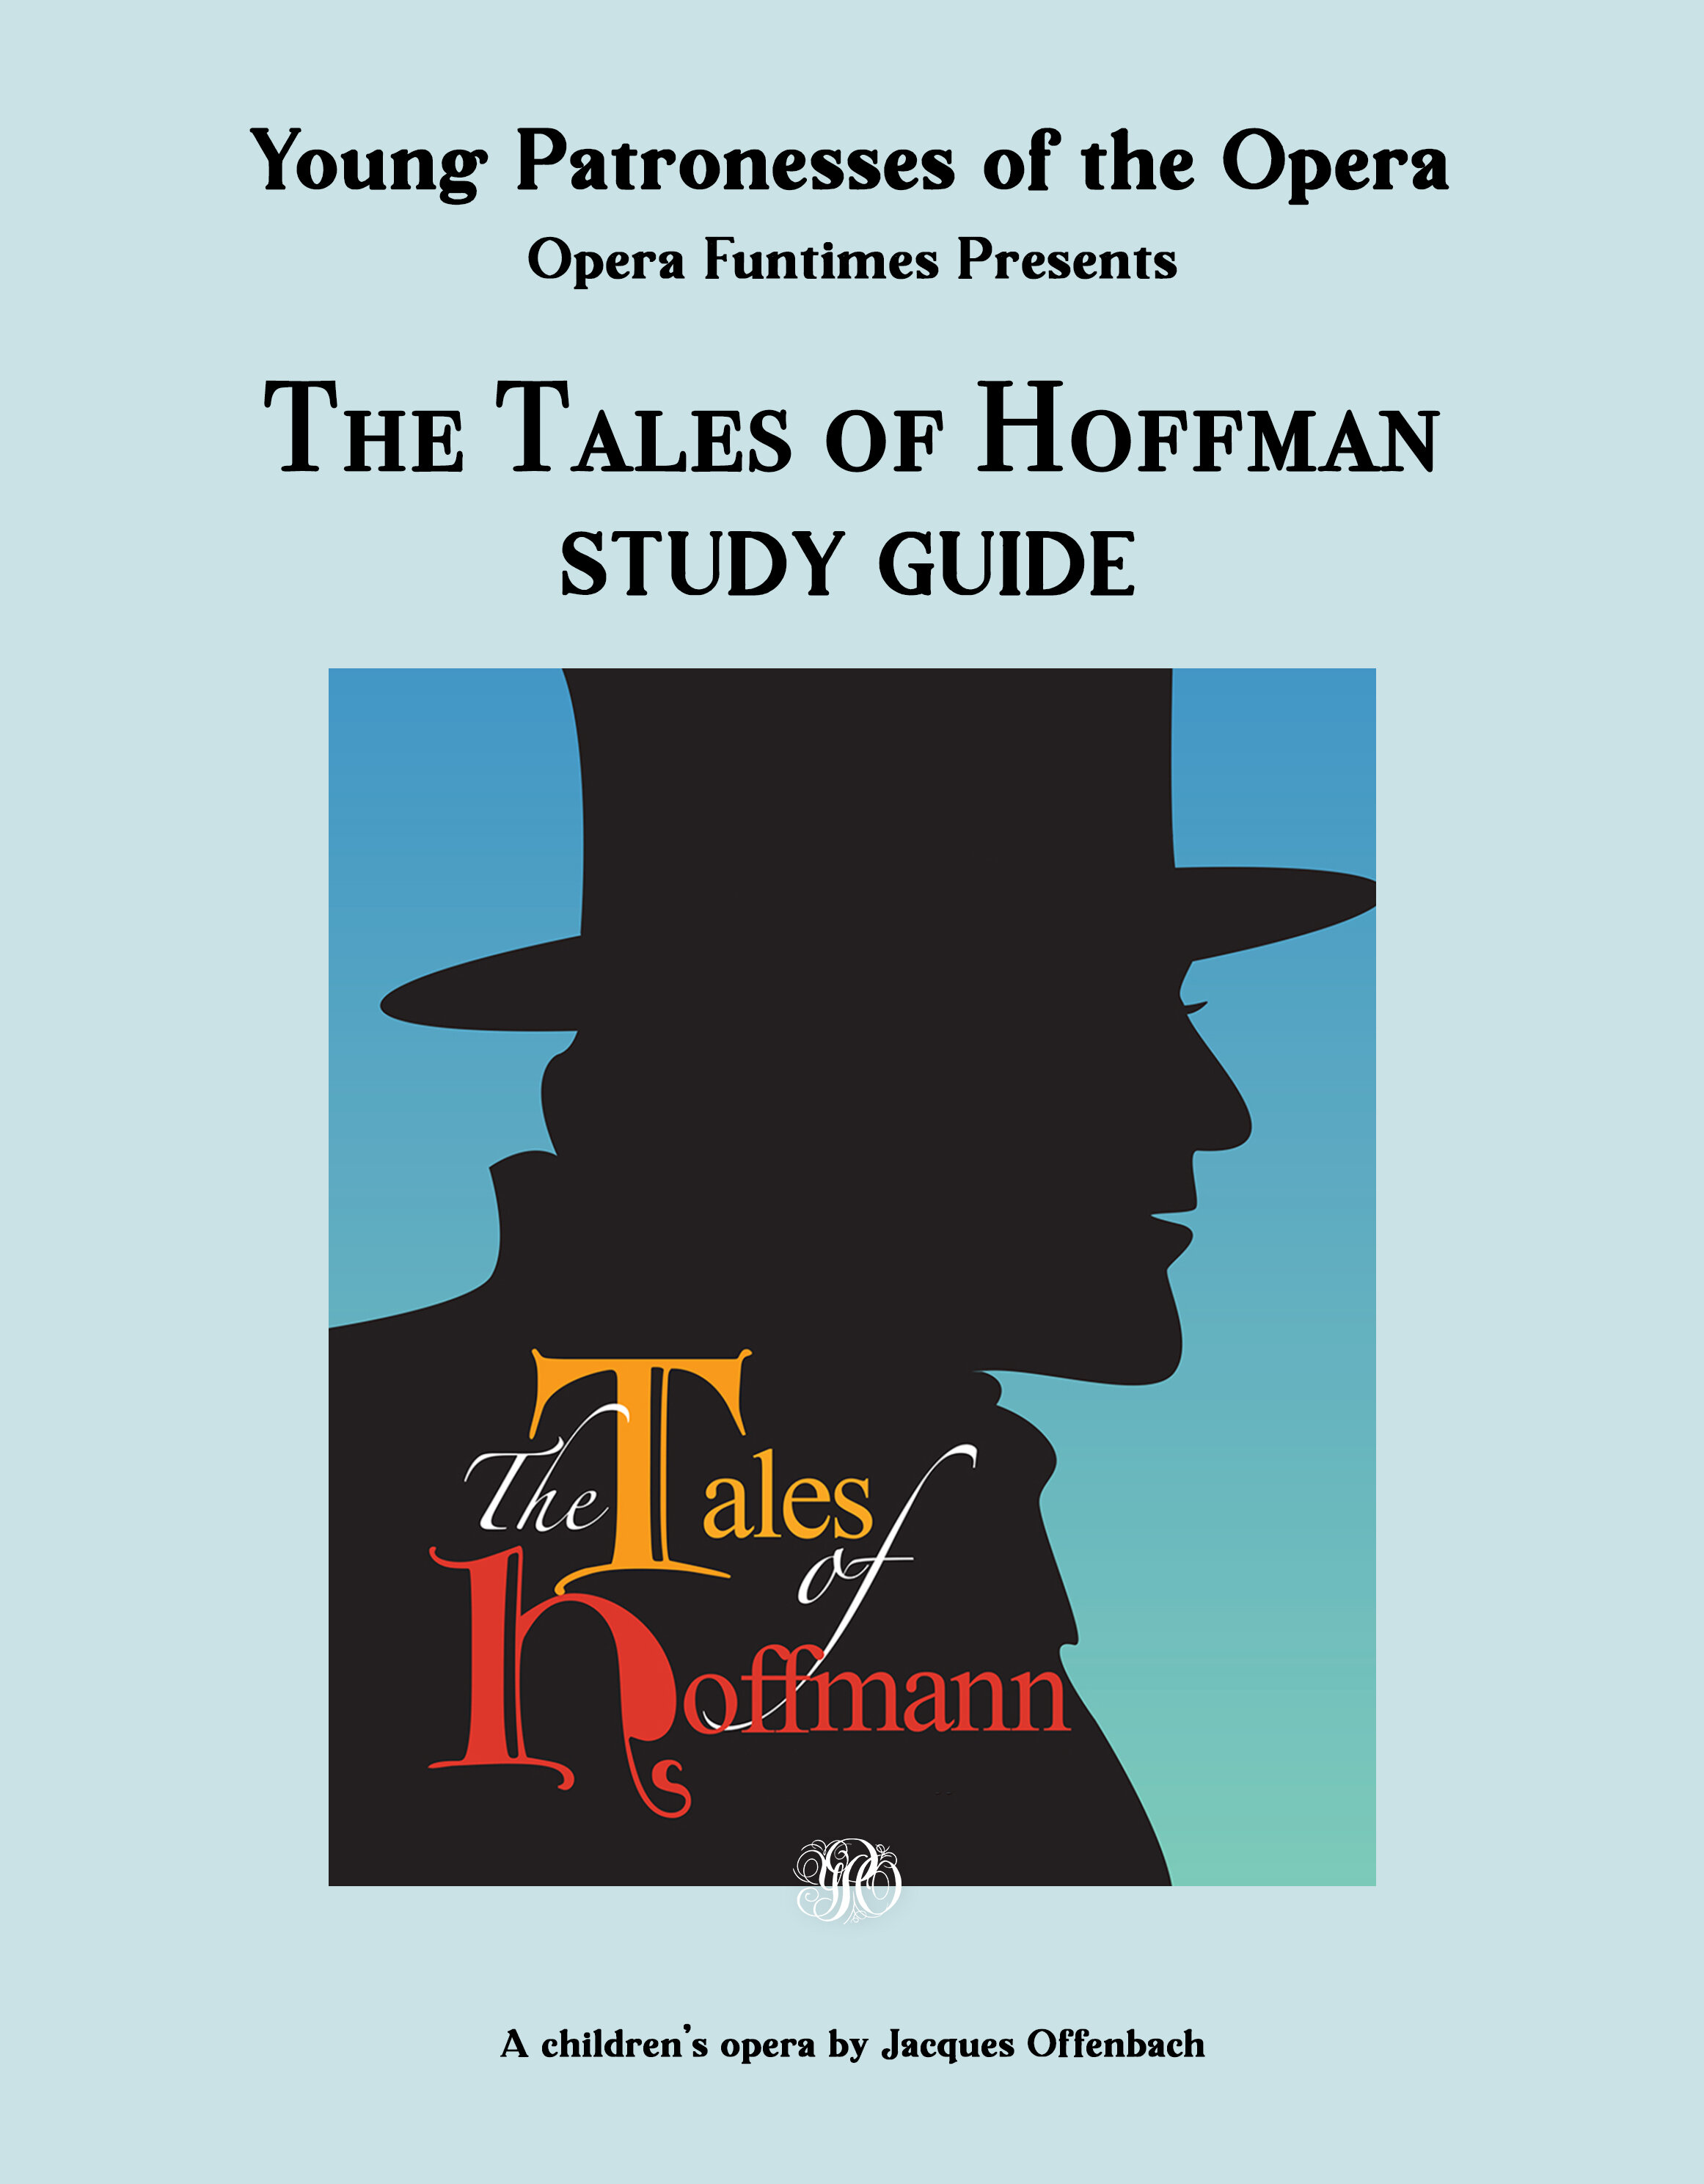 The Tales of Hoffman_Opera Funtimes Study Guide Cover.jpg